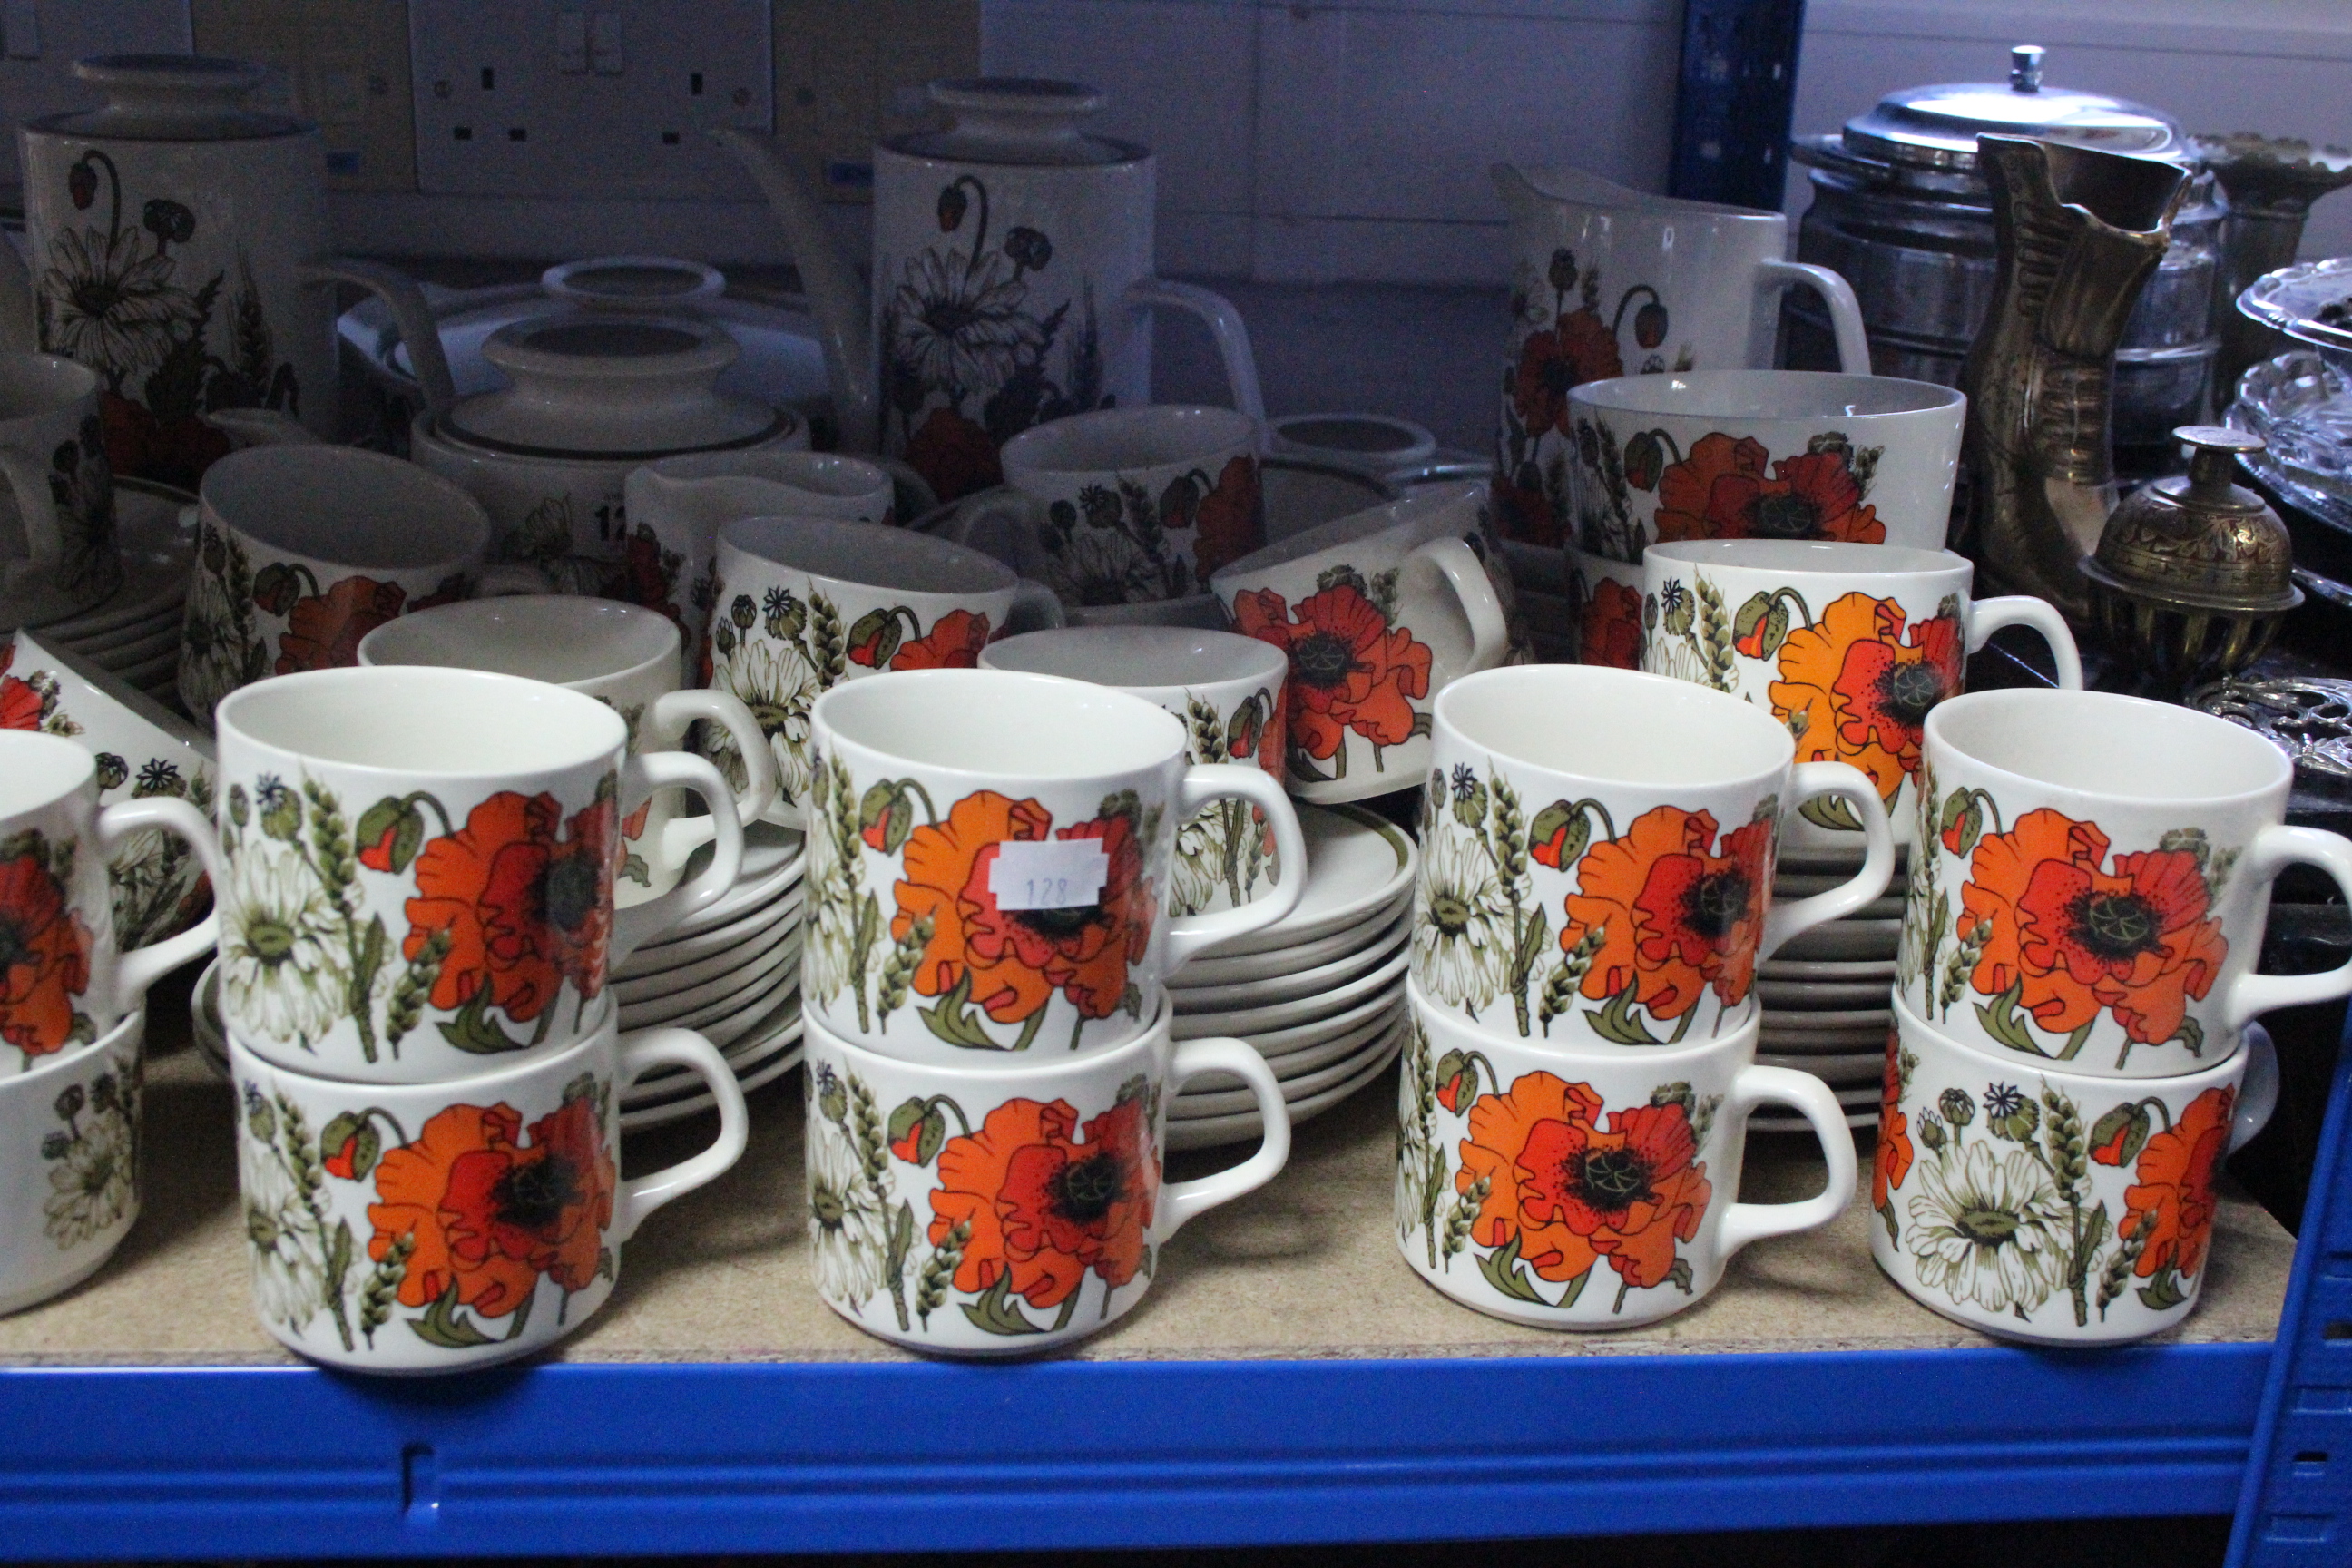 Approximately sixty various items of Meakins “Poppy” pattern dinner, tea & coffeware.